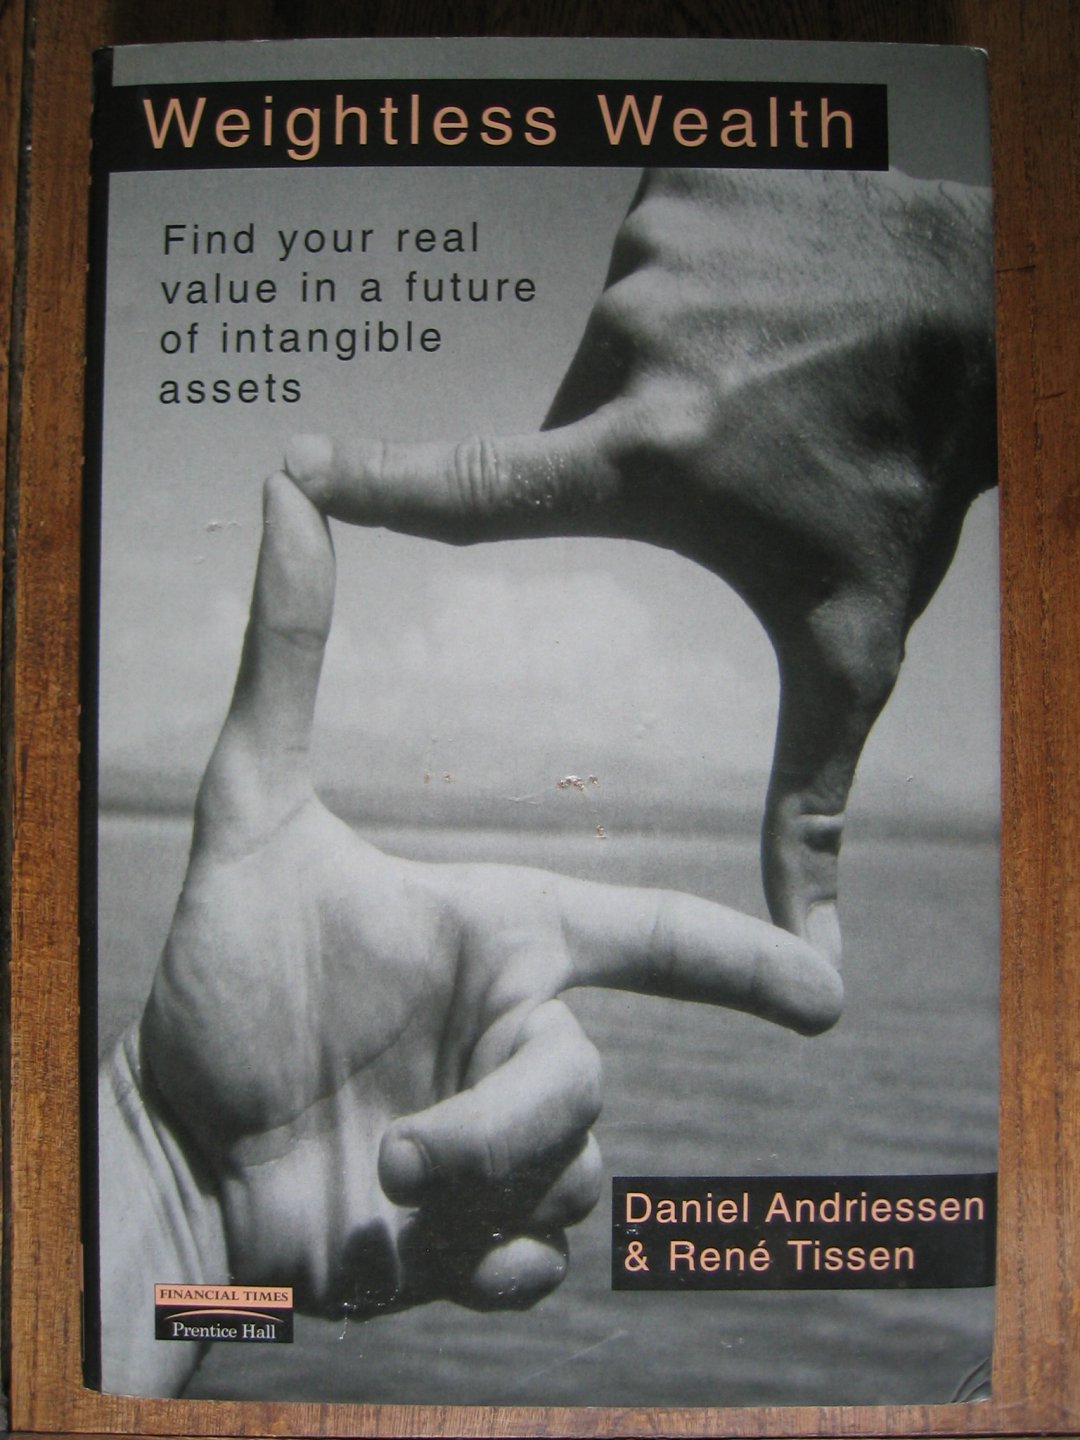 Andriessen, Daniel en Rene Tissen - Weightless Wealth. Find your real value in a future of intangible assets.